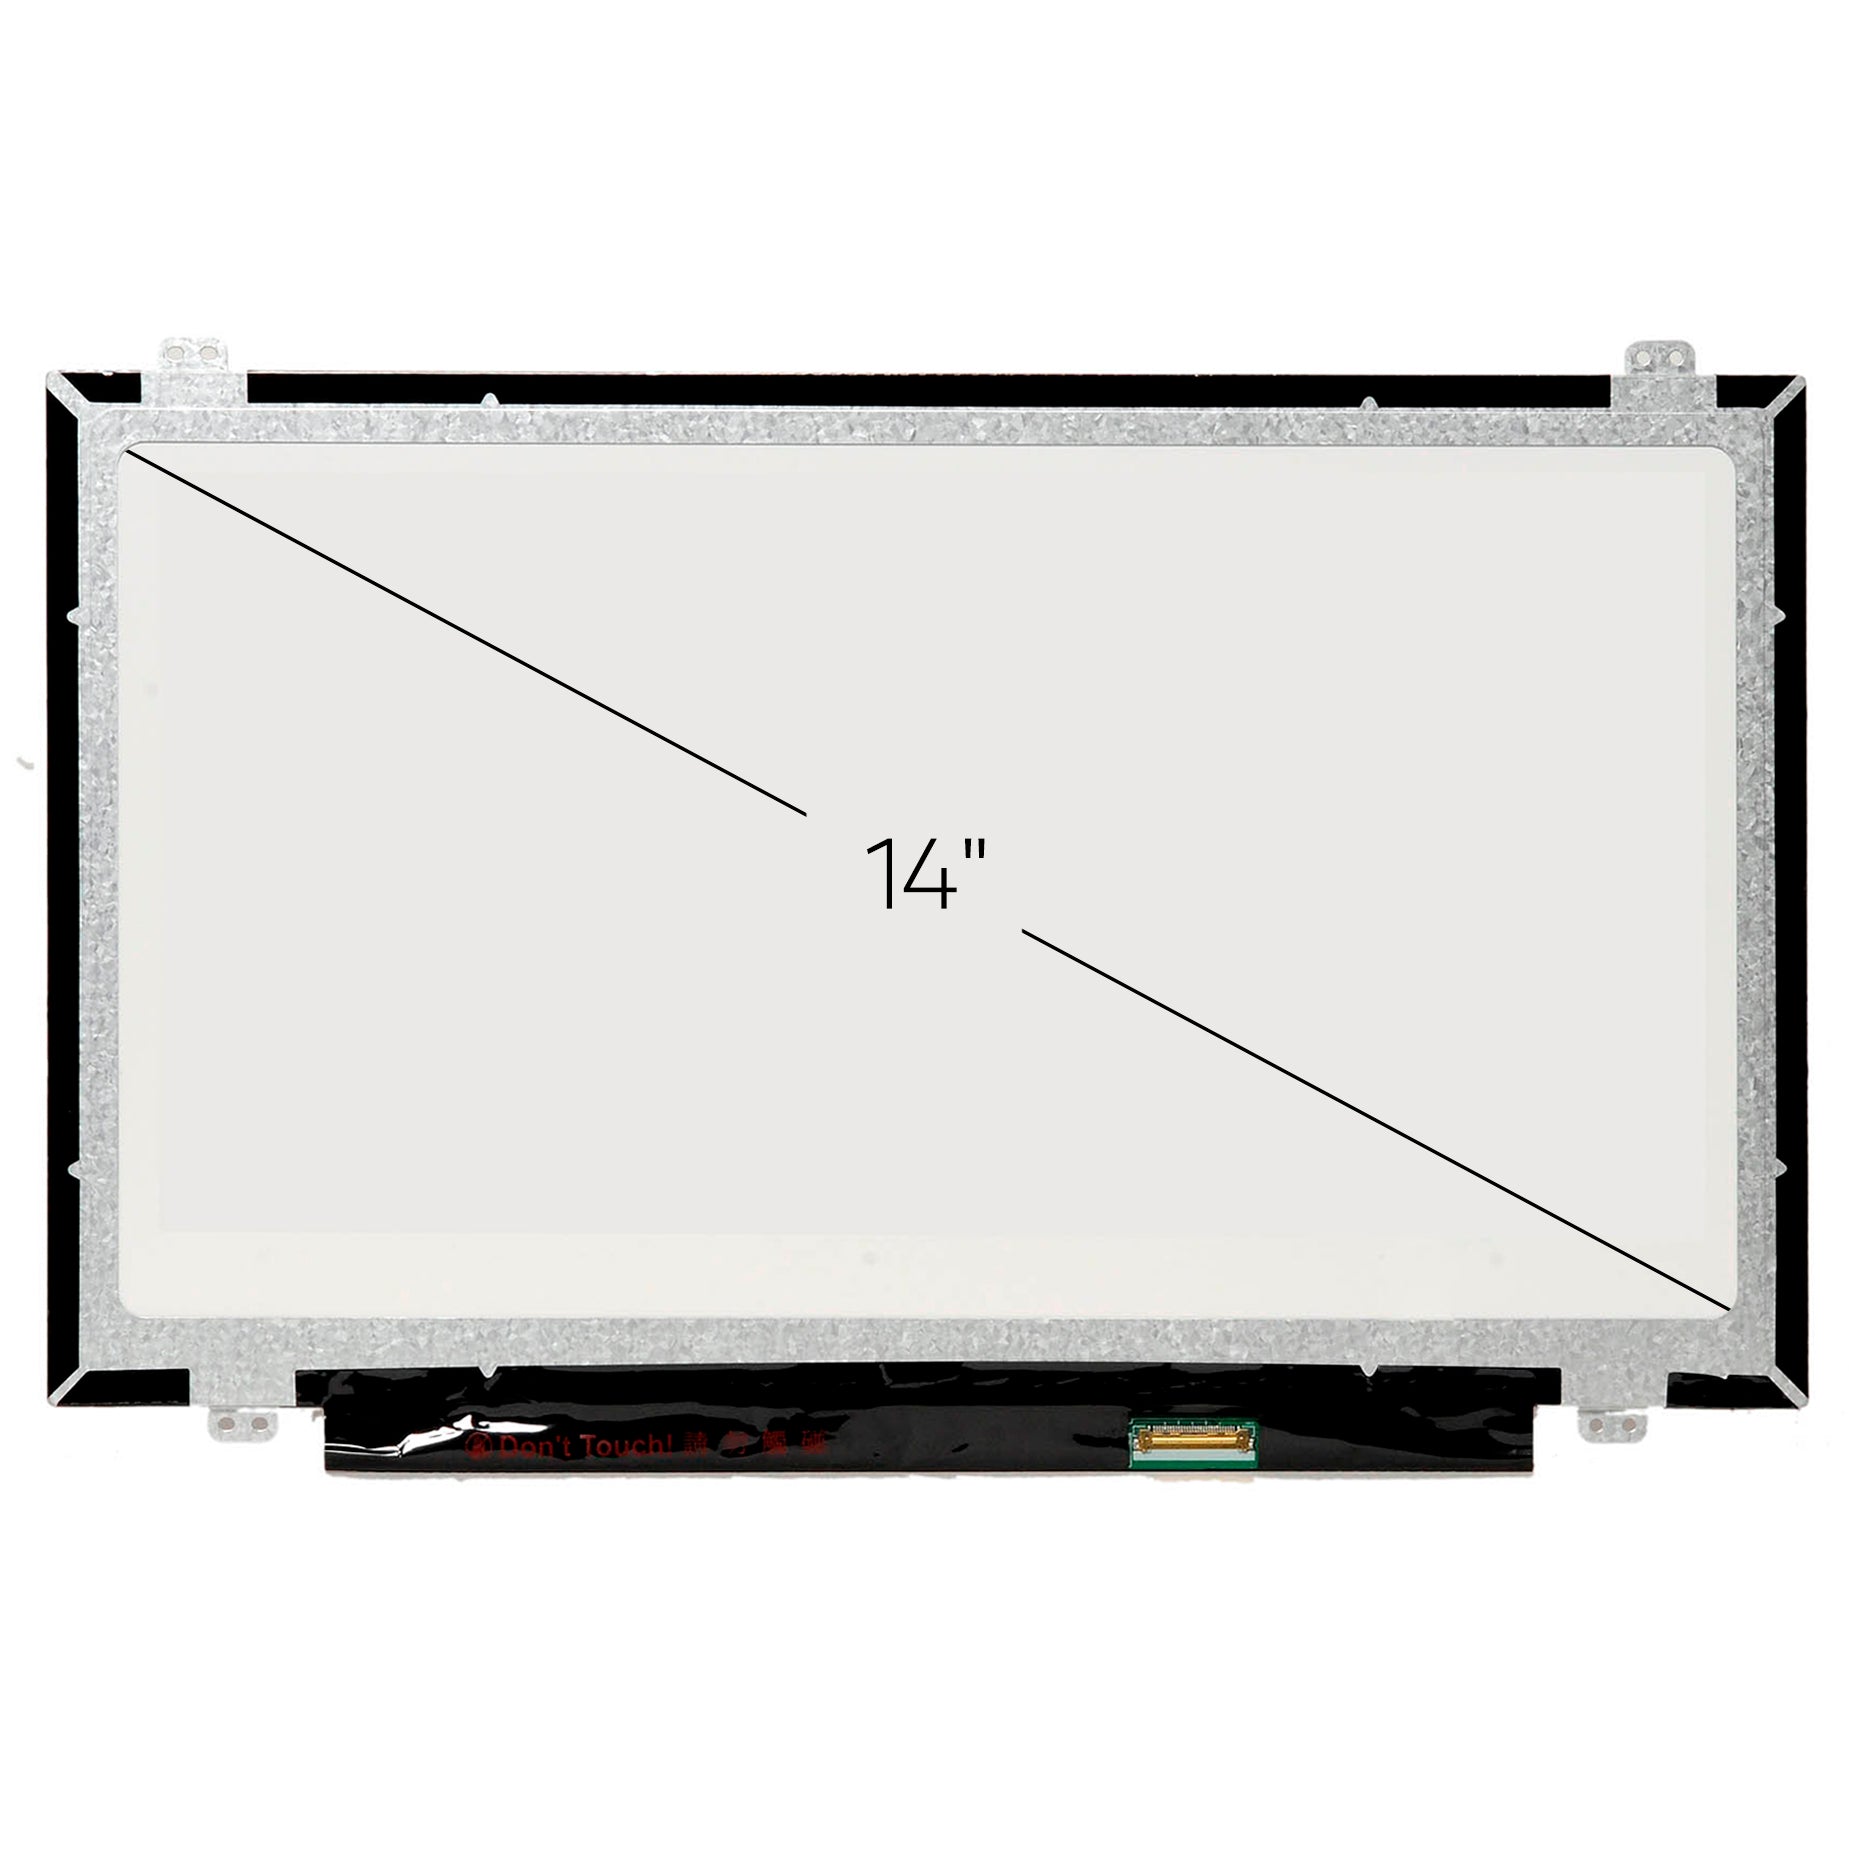 Screen Replacement for Acer Chromebook CB3-431-C99D HD 1366x768 Glossy LCD LED Display